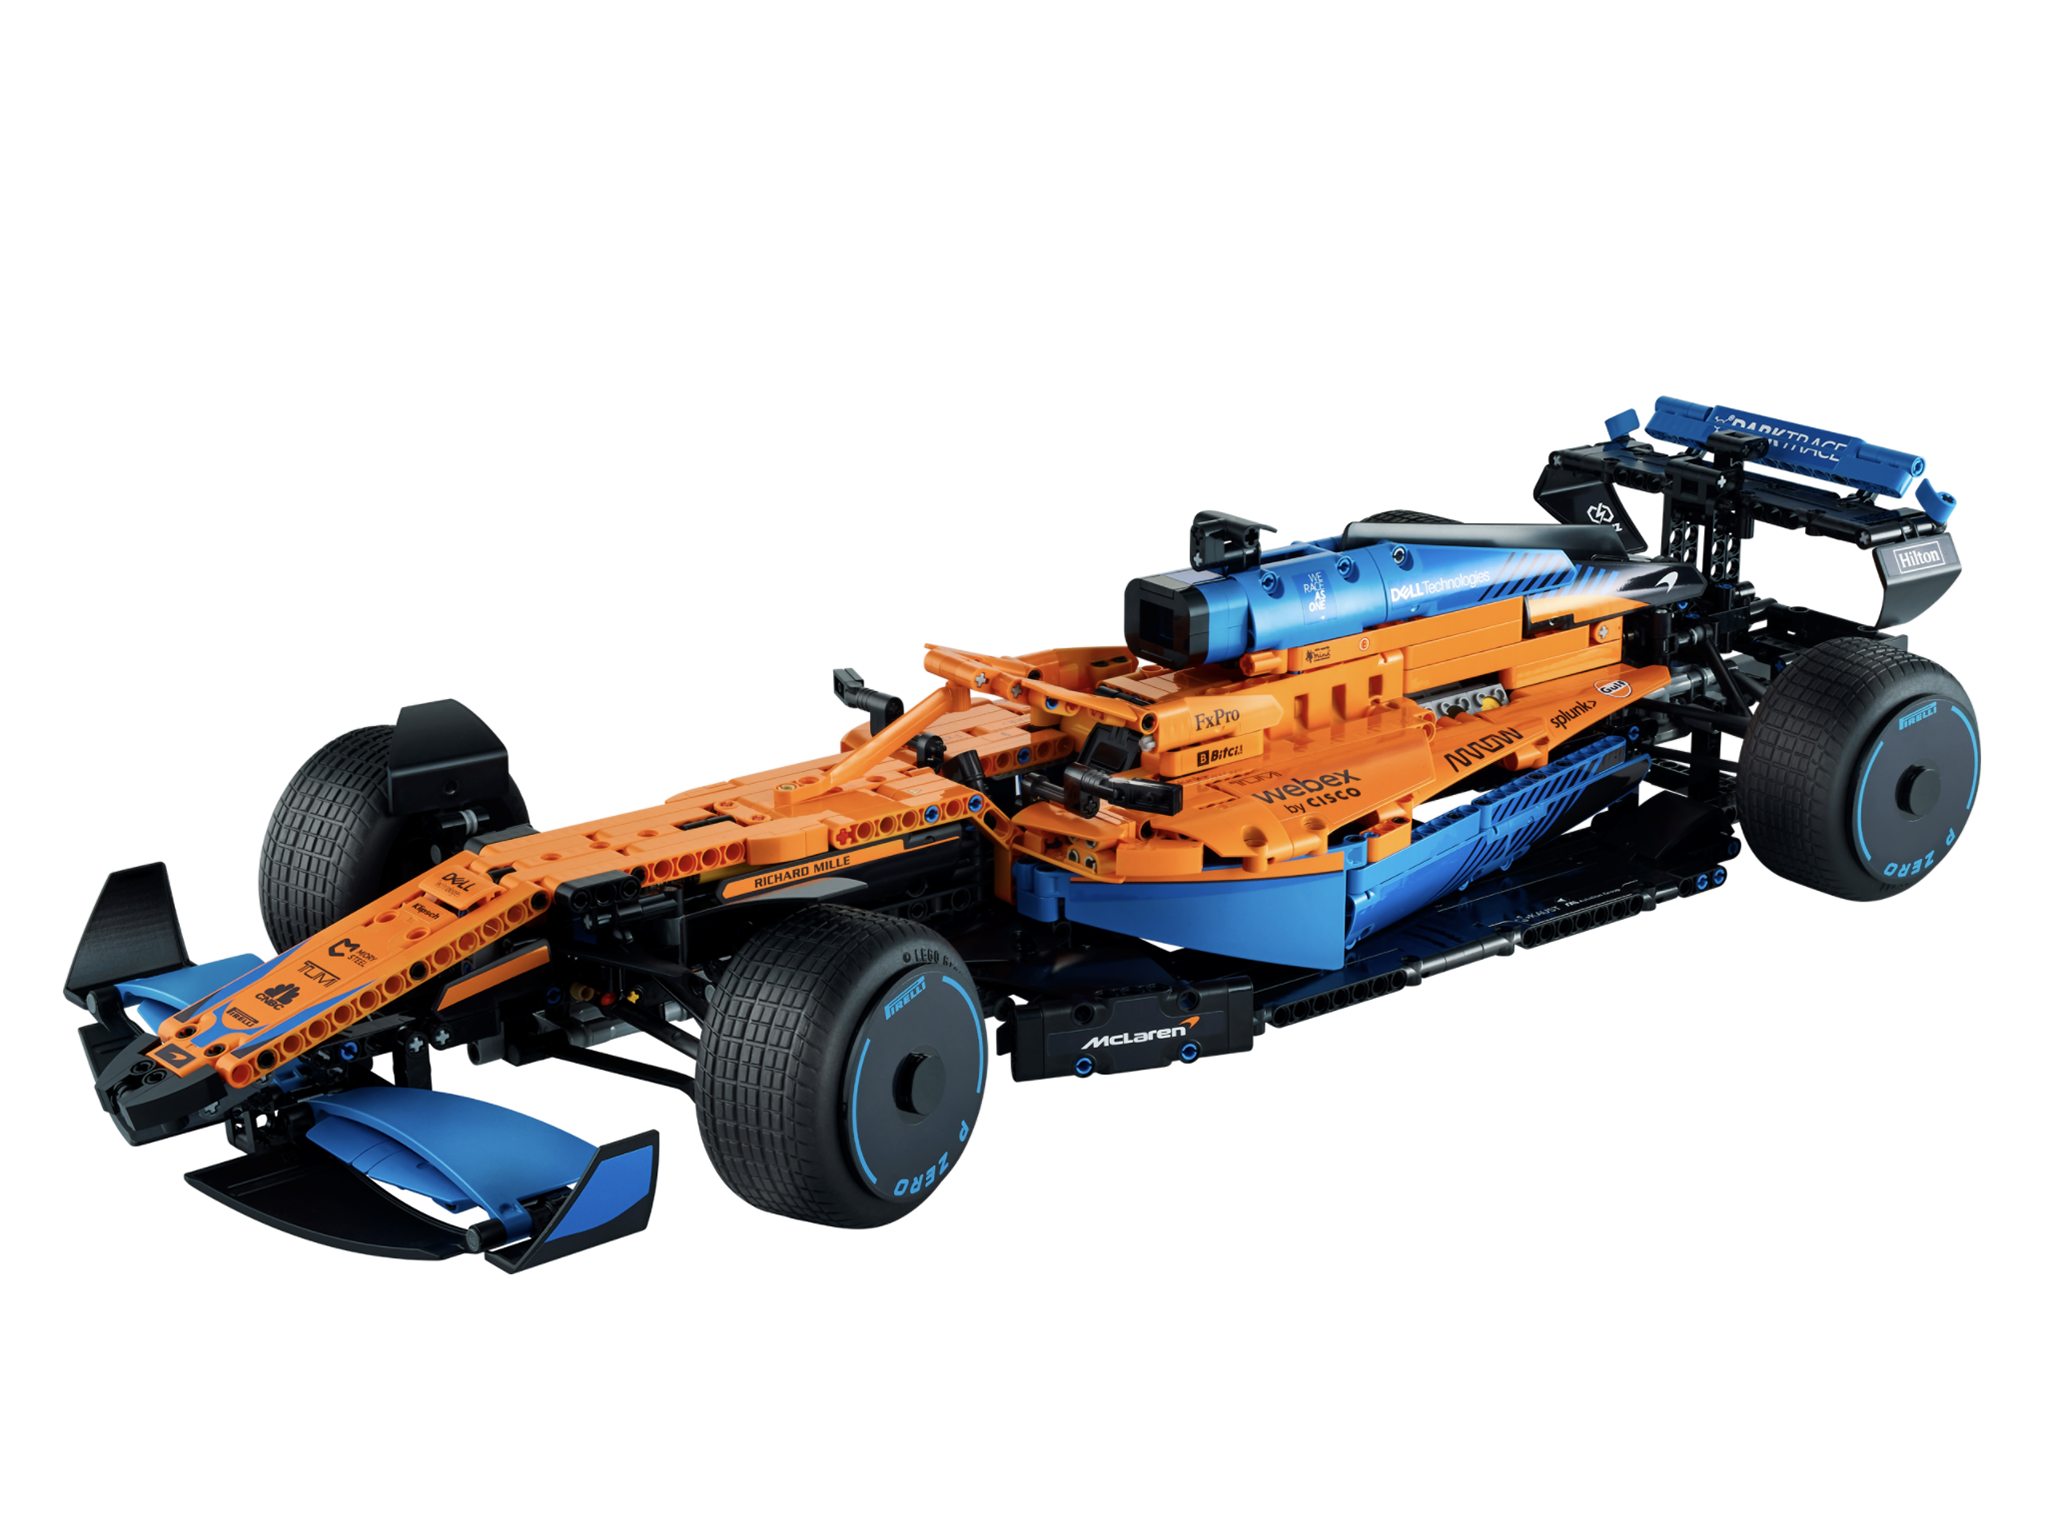 Lego McLaren F1 car Save 25% at Amazon on the replica racing build The Independent